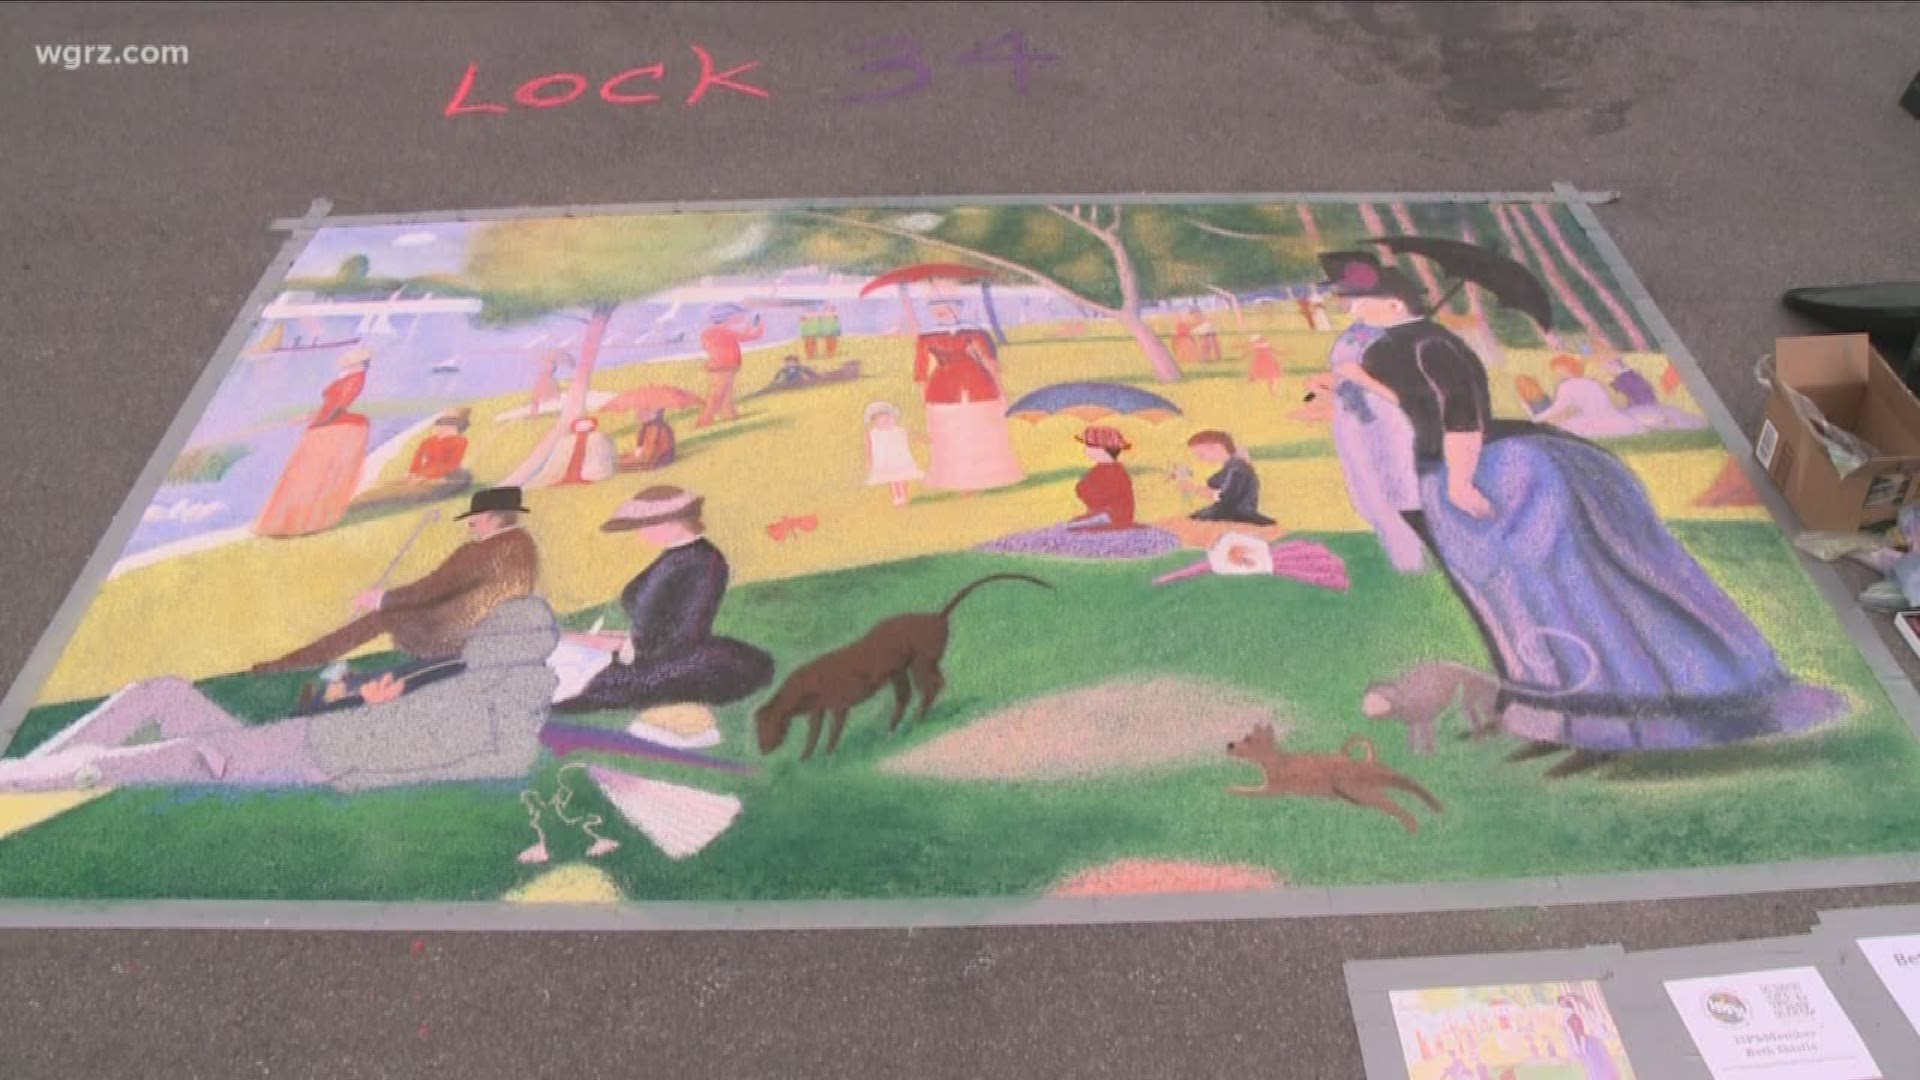 The annual Sweet Chalk Festival runs Saturday and Sunday in Lockport. Find works of art near Main and Pine.